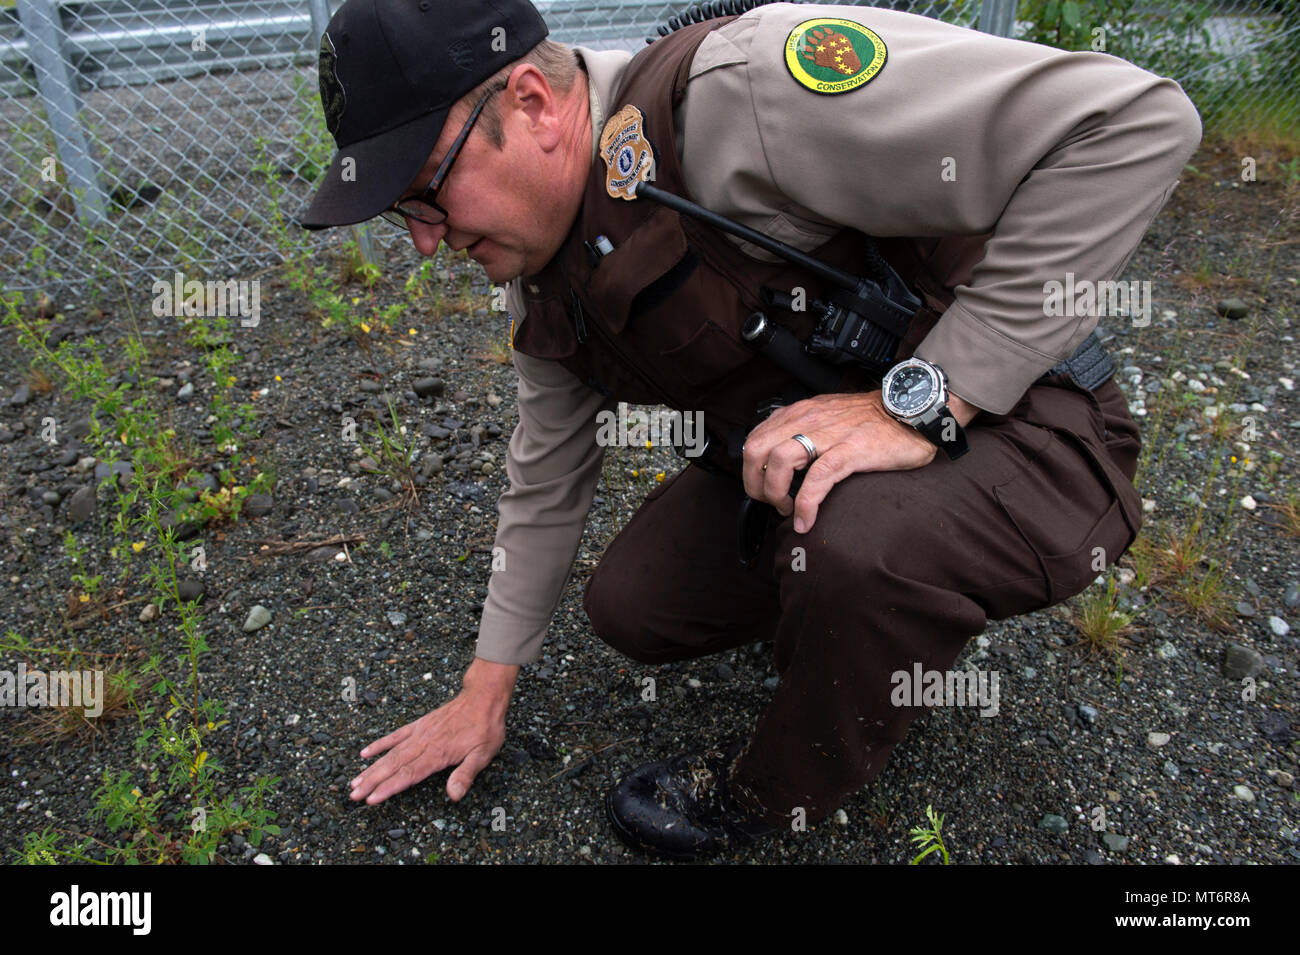 James Wendland, 673d Civil Engineer Squadron chief conservation law  enforcement officer, inspects a site where people were reportedly feeding  wildlife, at Joint Base Elmendorf-Richardson, Alaska, June 30, 2017.  According to the Alaska